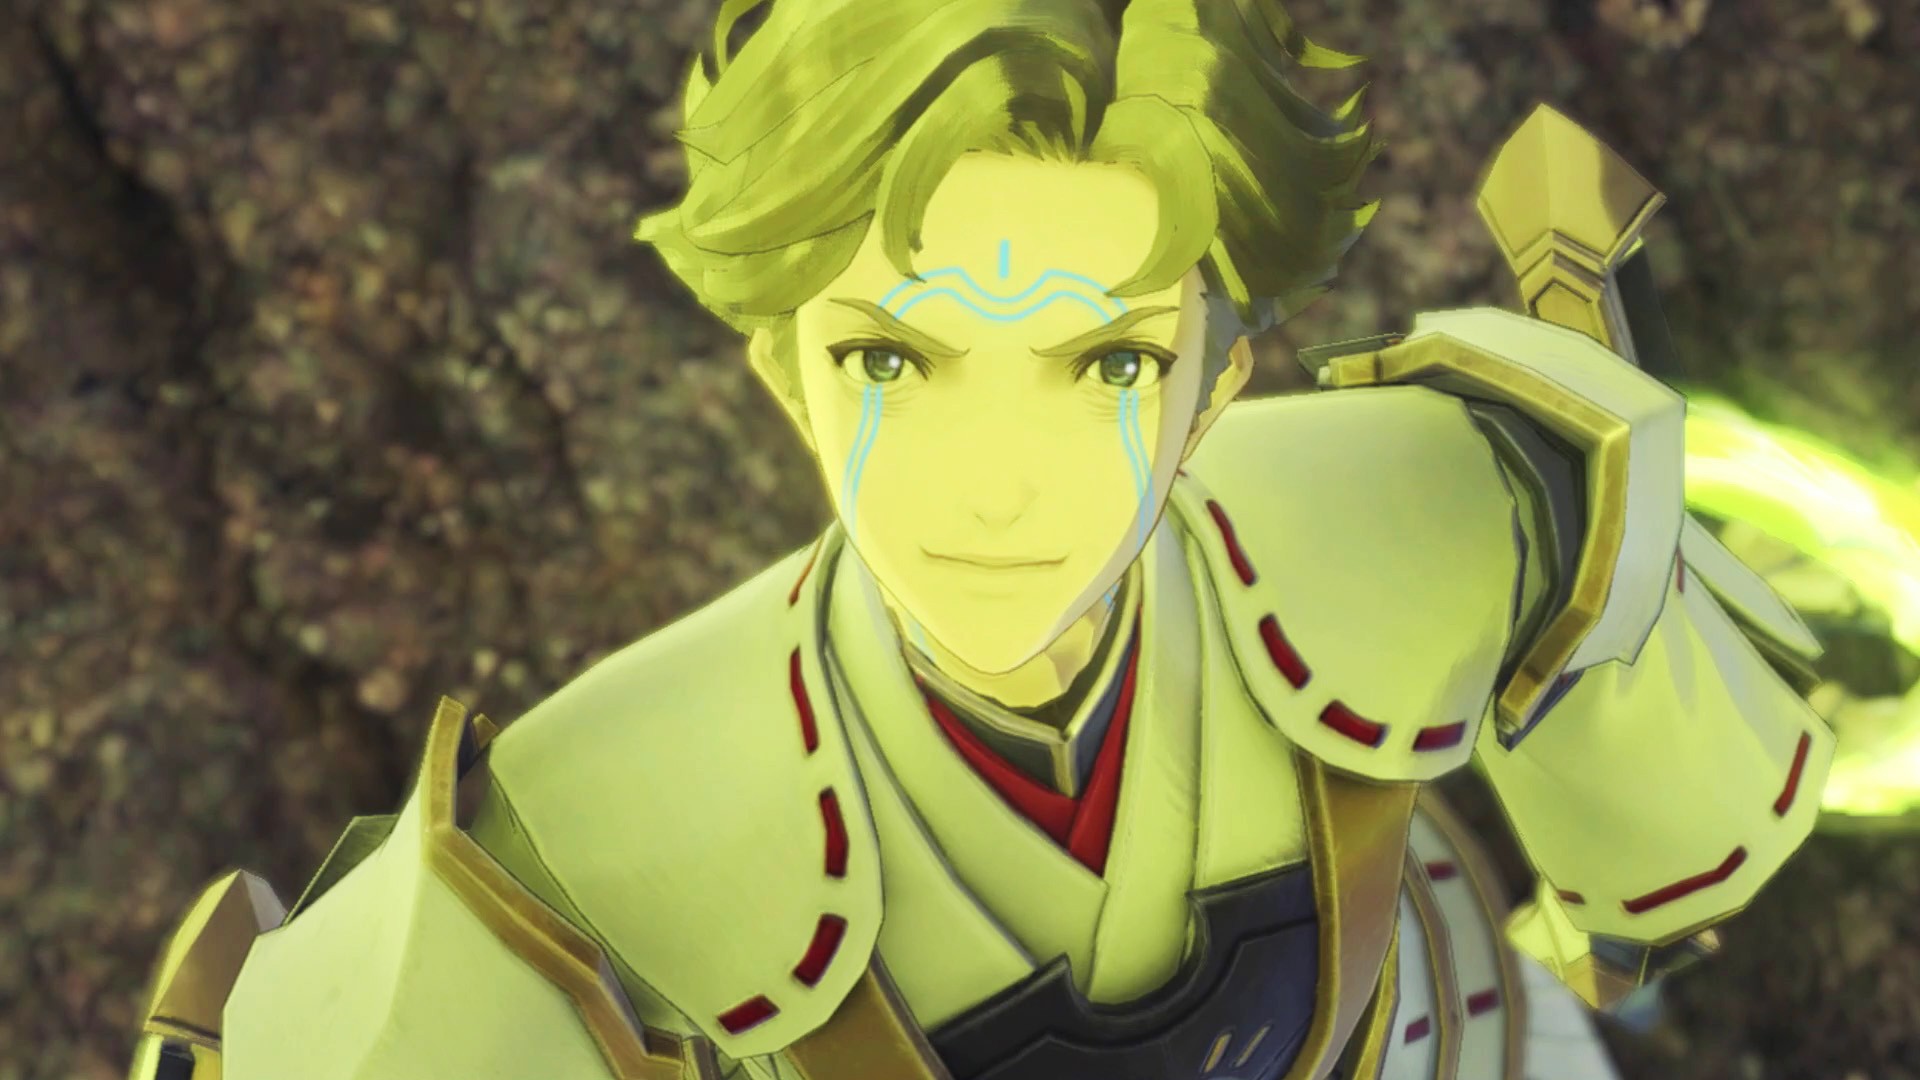 xenoblade chronicles 3 classes character looking into the camera determined